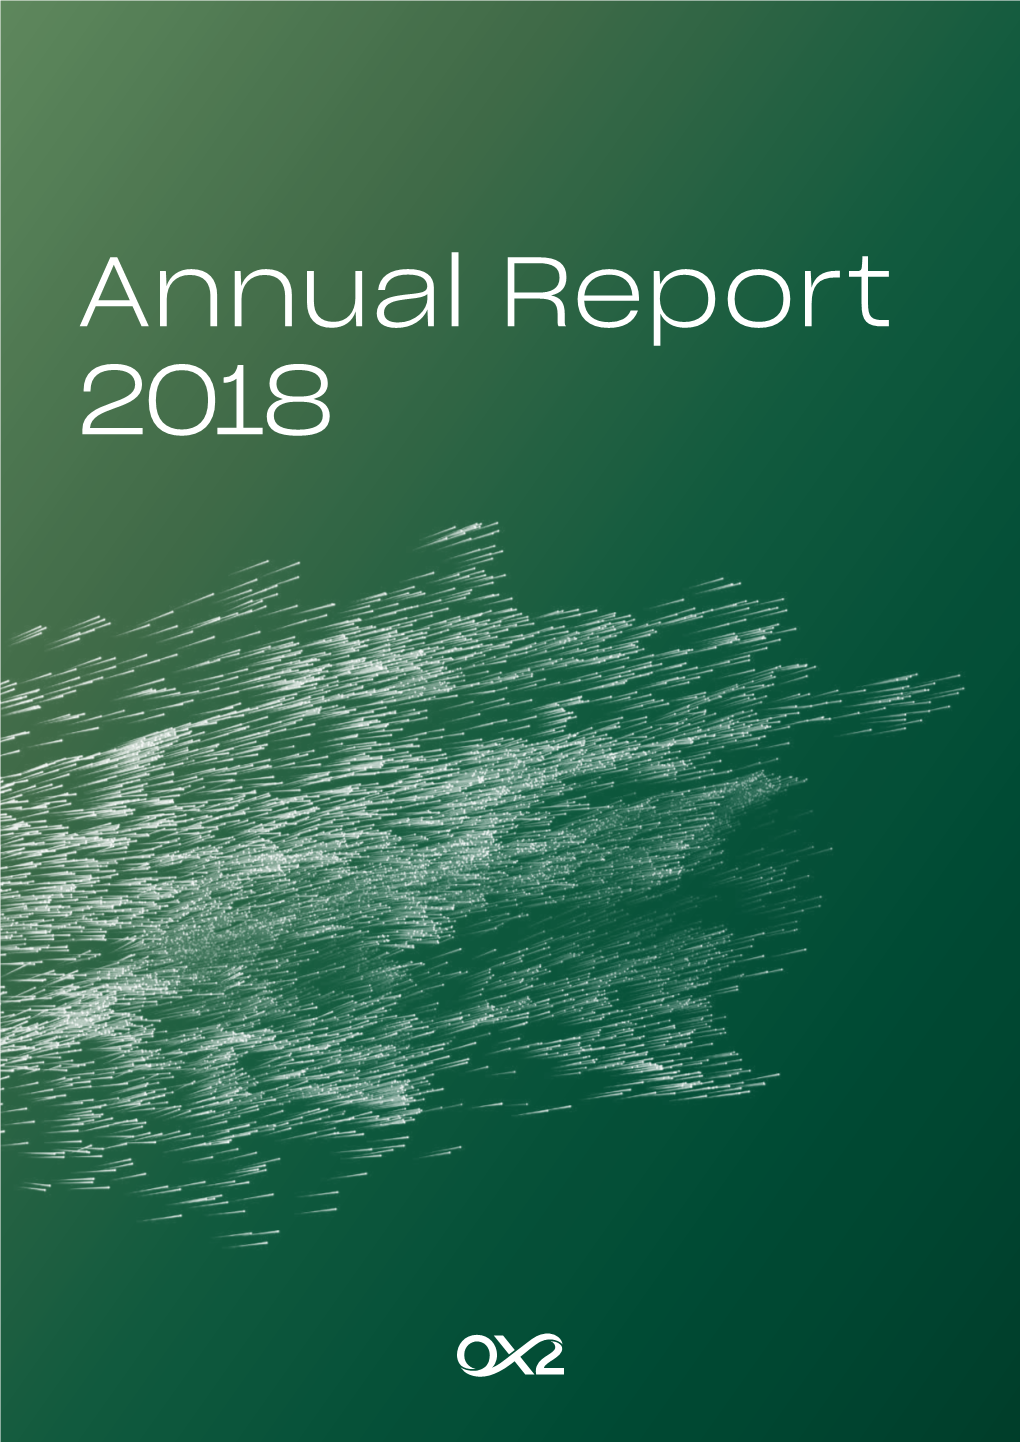 Annual Report 2018 About OX2